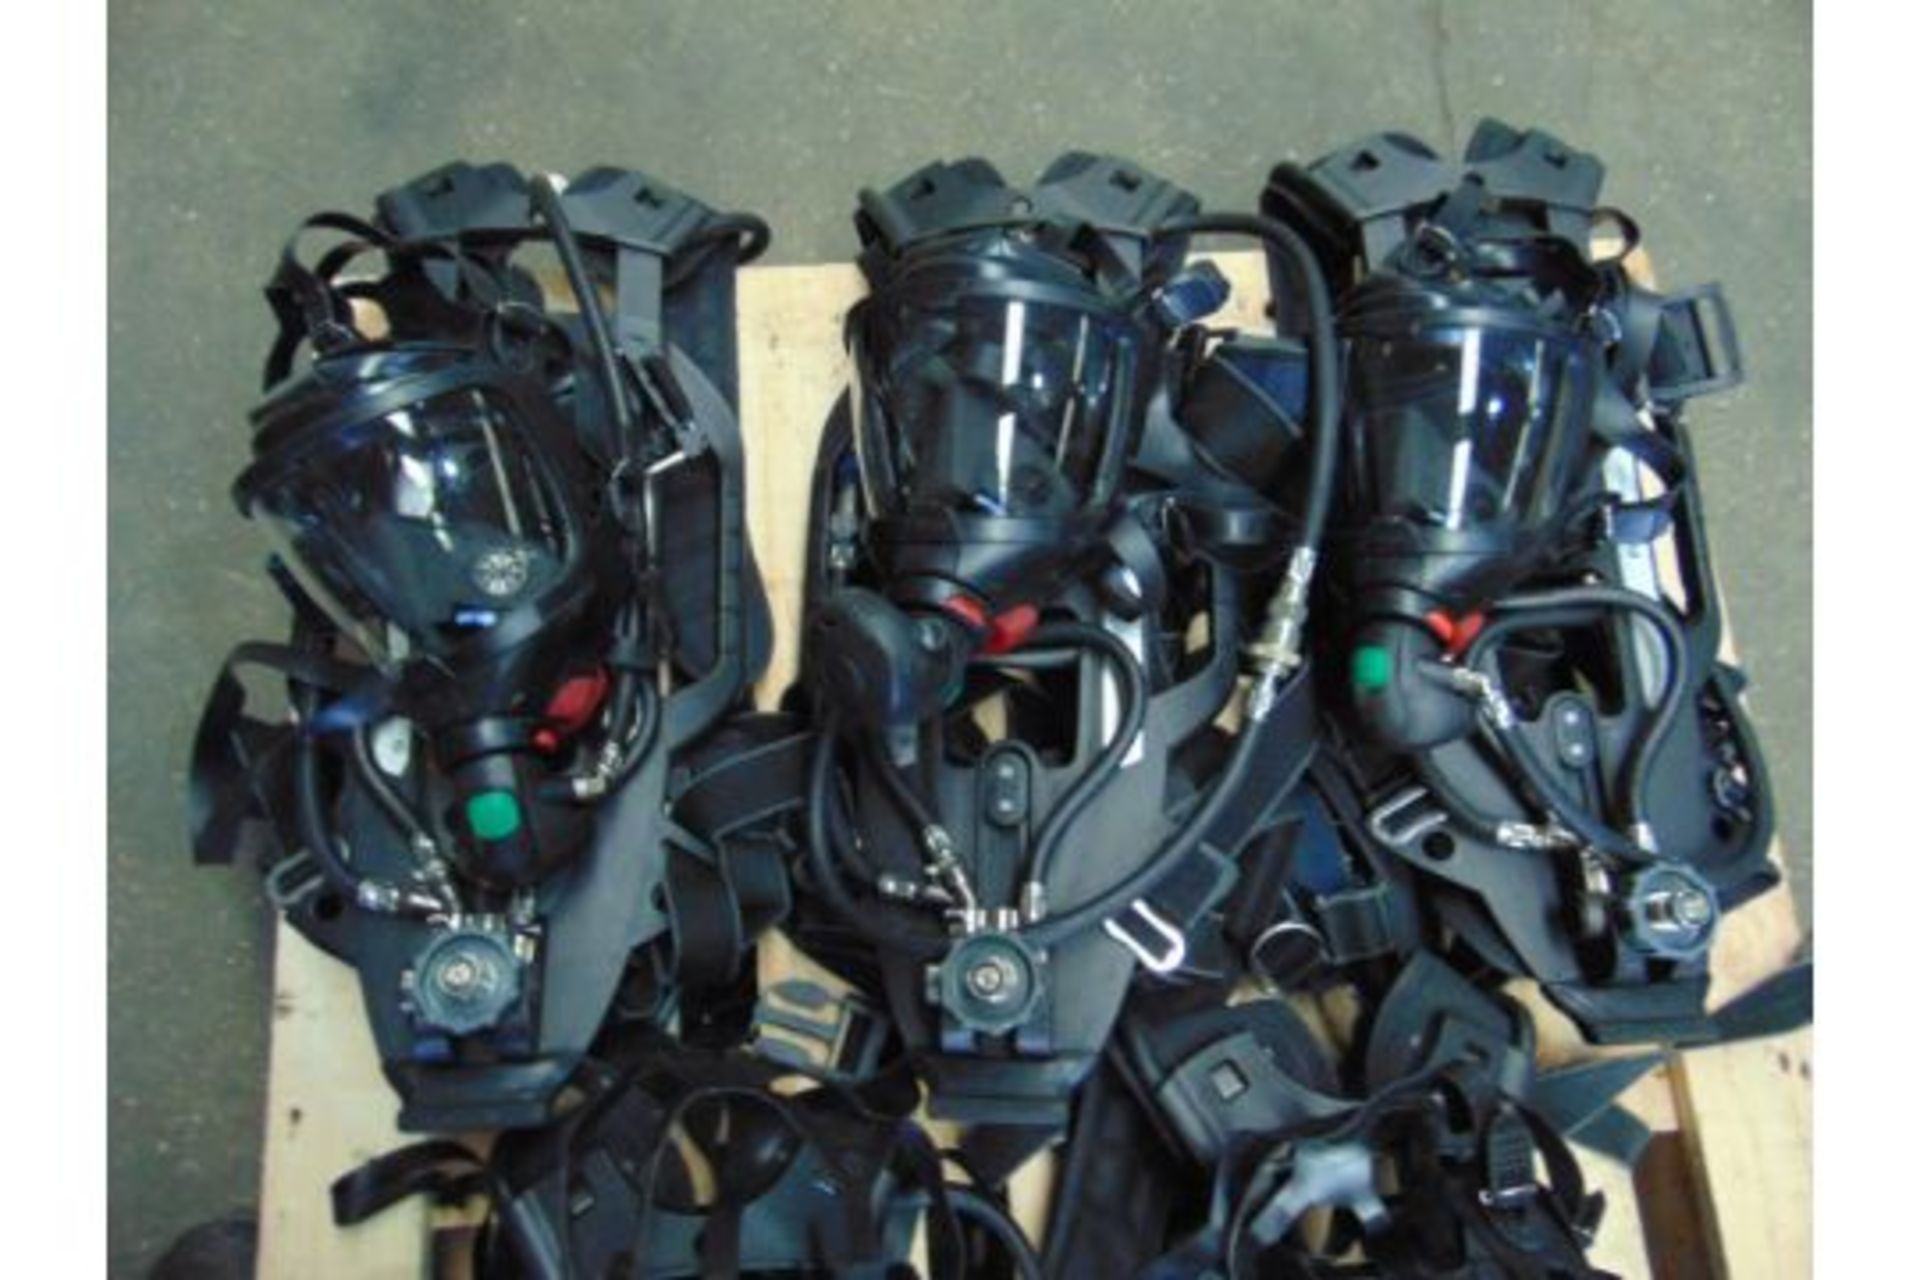 5 x Drager PSS 7000 Self Contained Breathing Apparatus w/ 10 x Drager 300 Bar Air Cylinders - Image 8 of 27